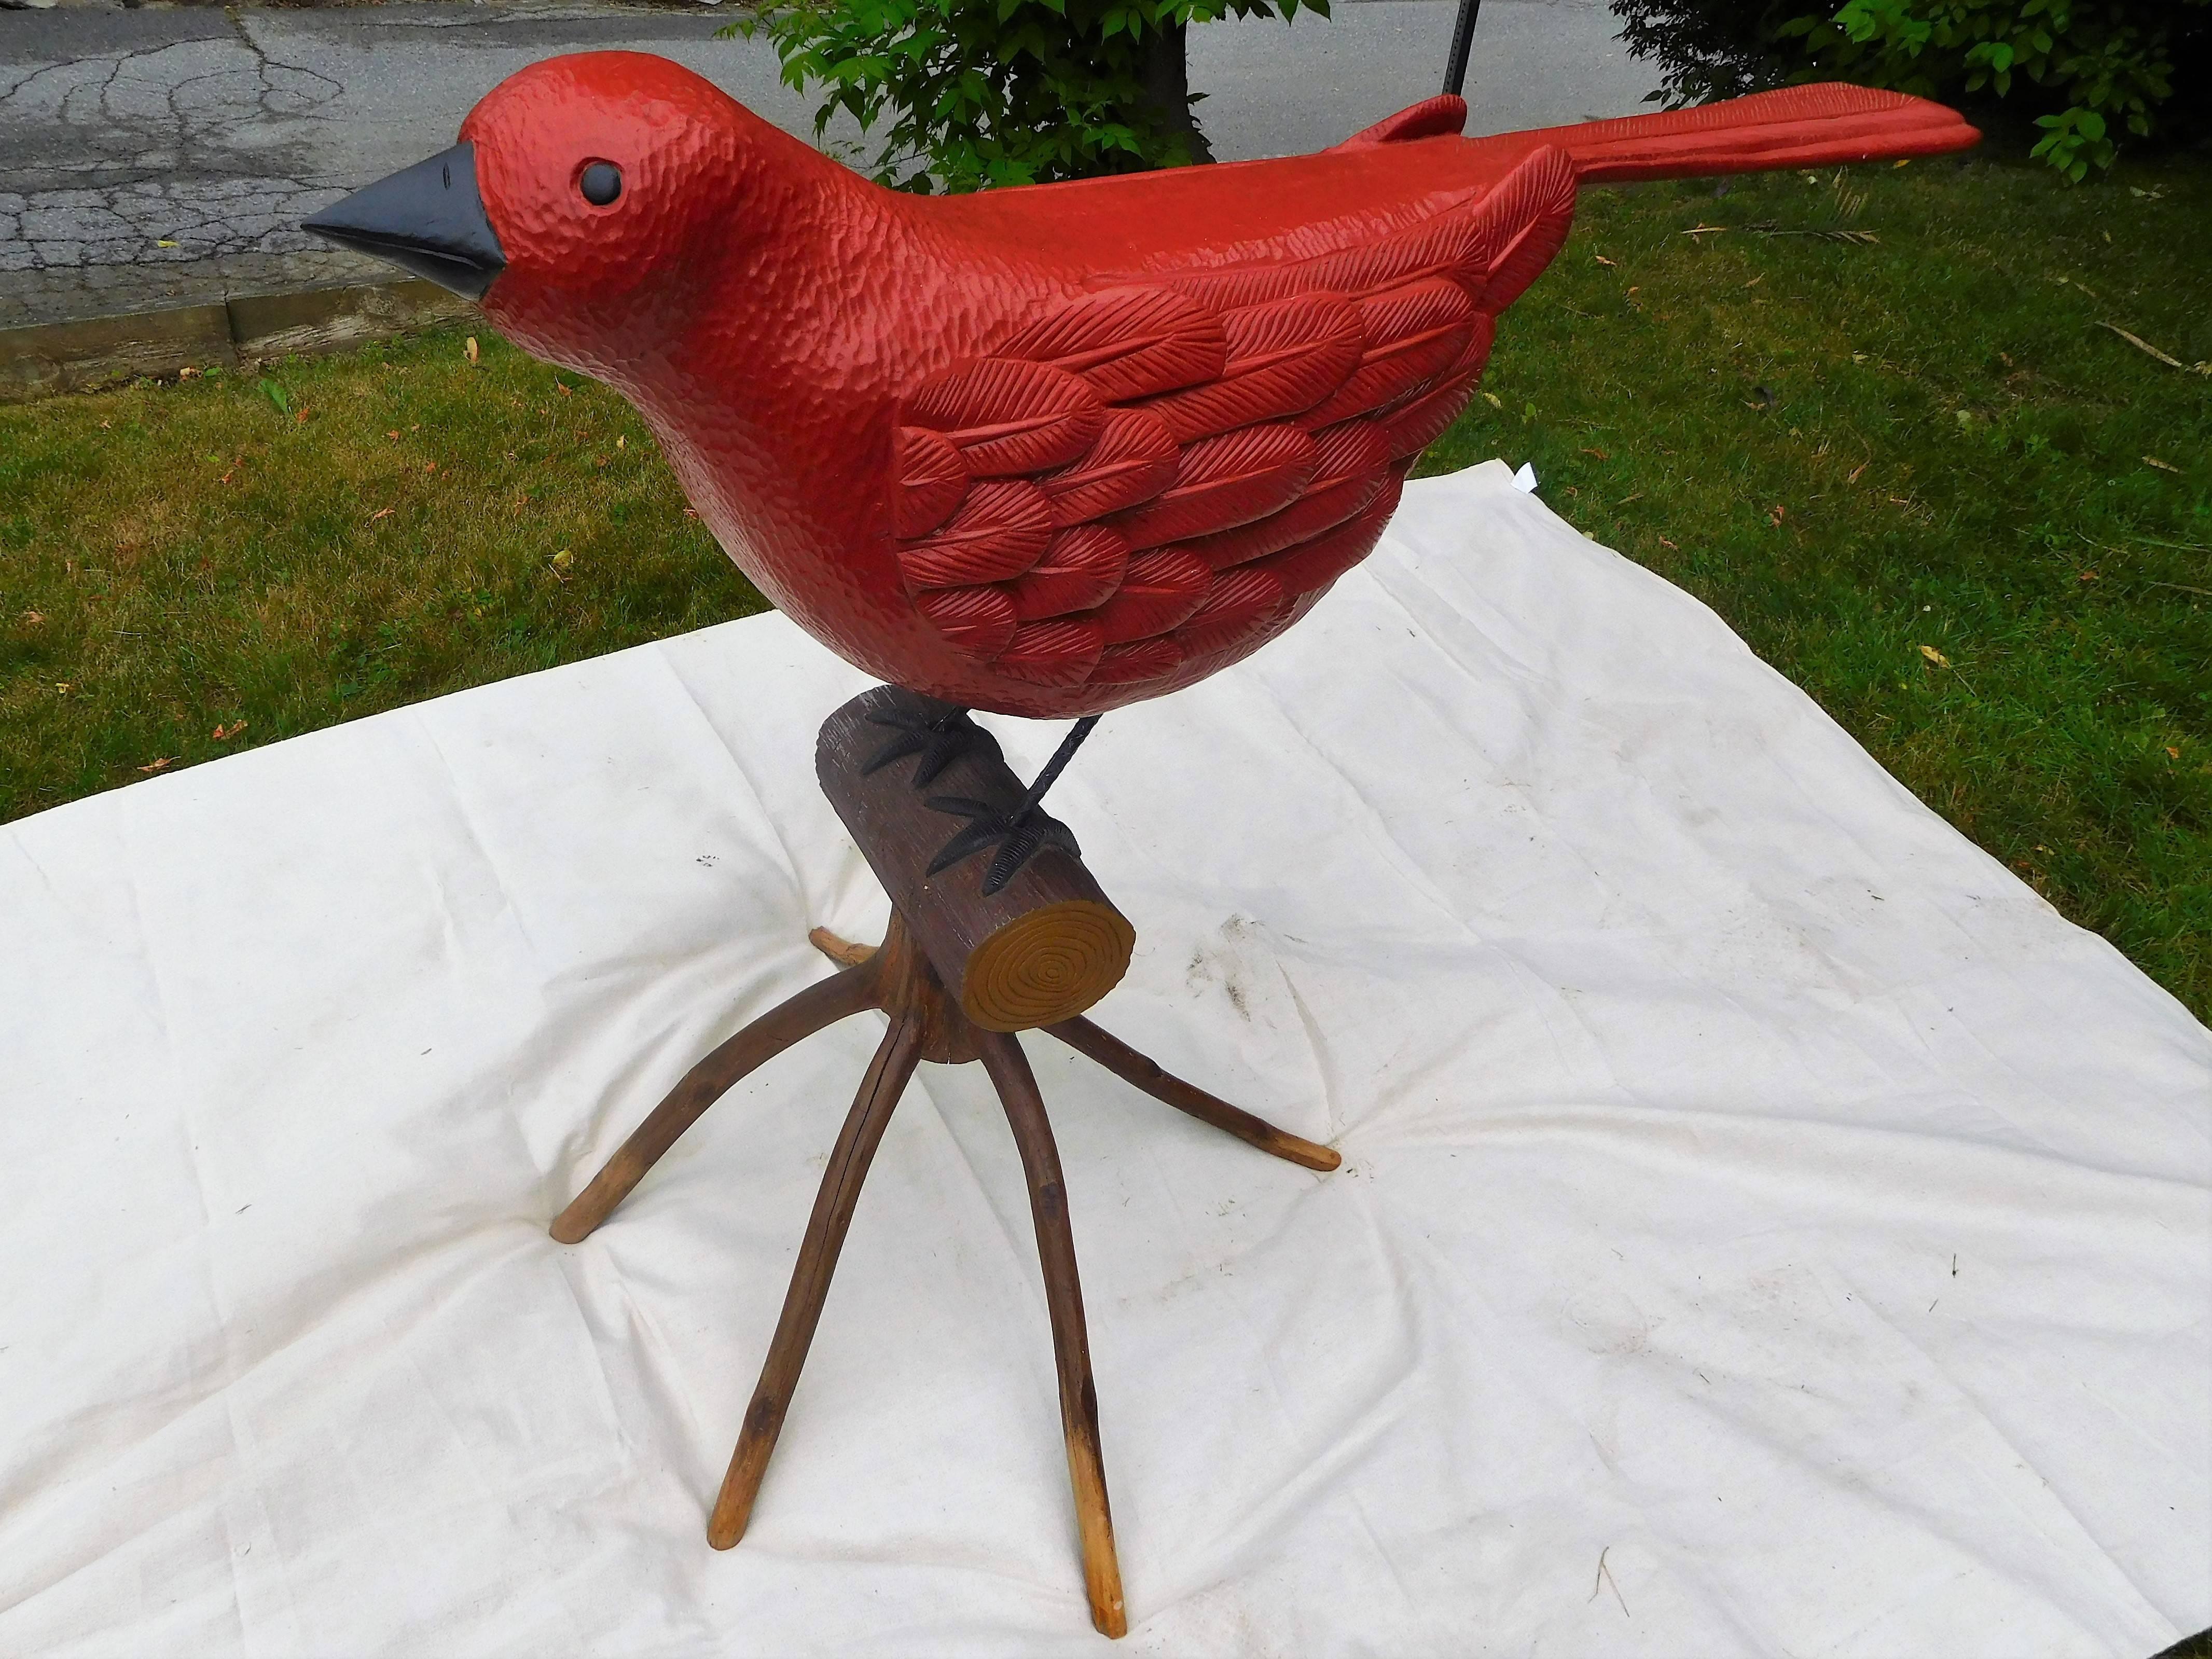 This wonderful giant-size bird of Vermont hardwood was carved and painted by the artist Stephen Huneck of St. Johnsbury, Vermont, in 1994 at the height of his career. It is sold immediately to a private collection, and is now offered for sale on the